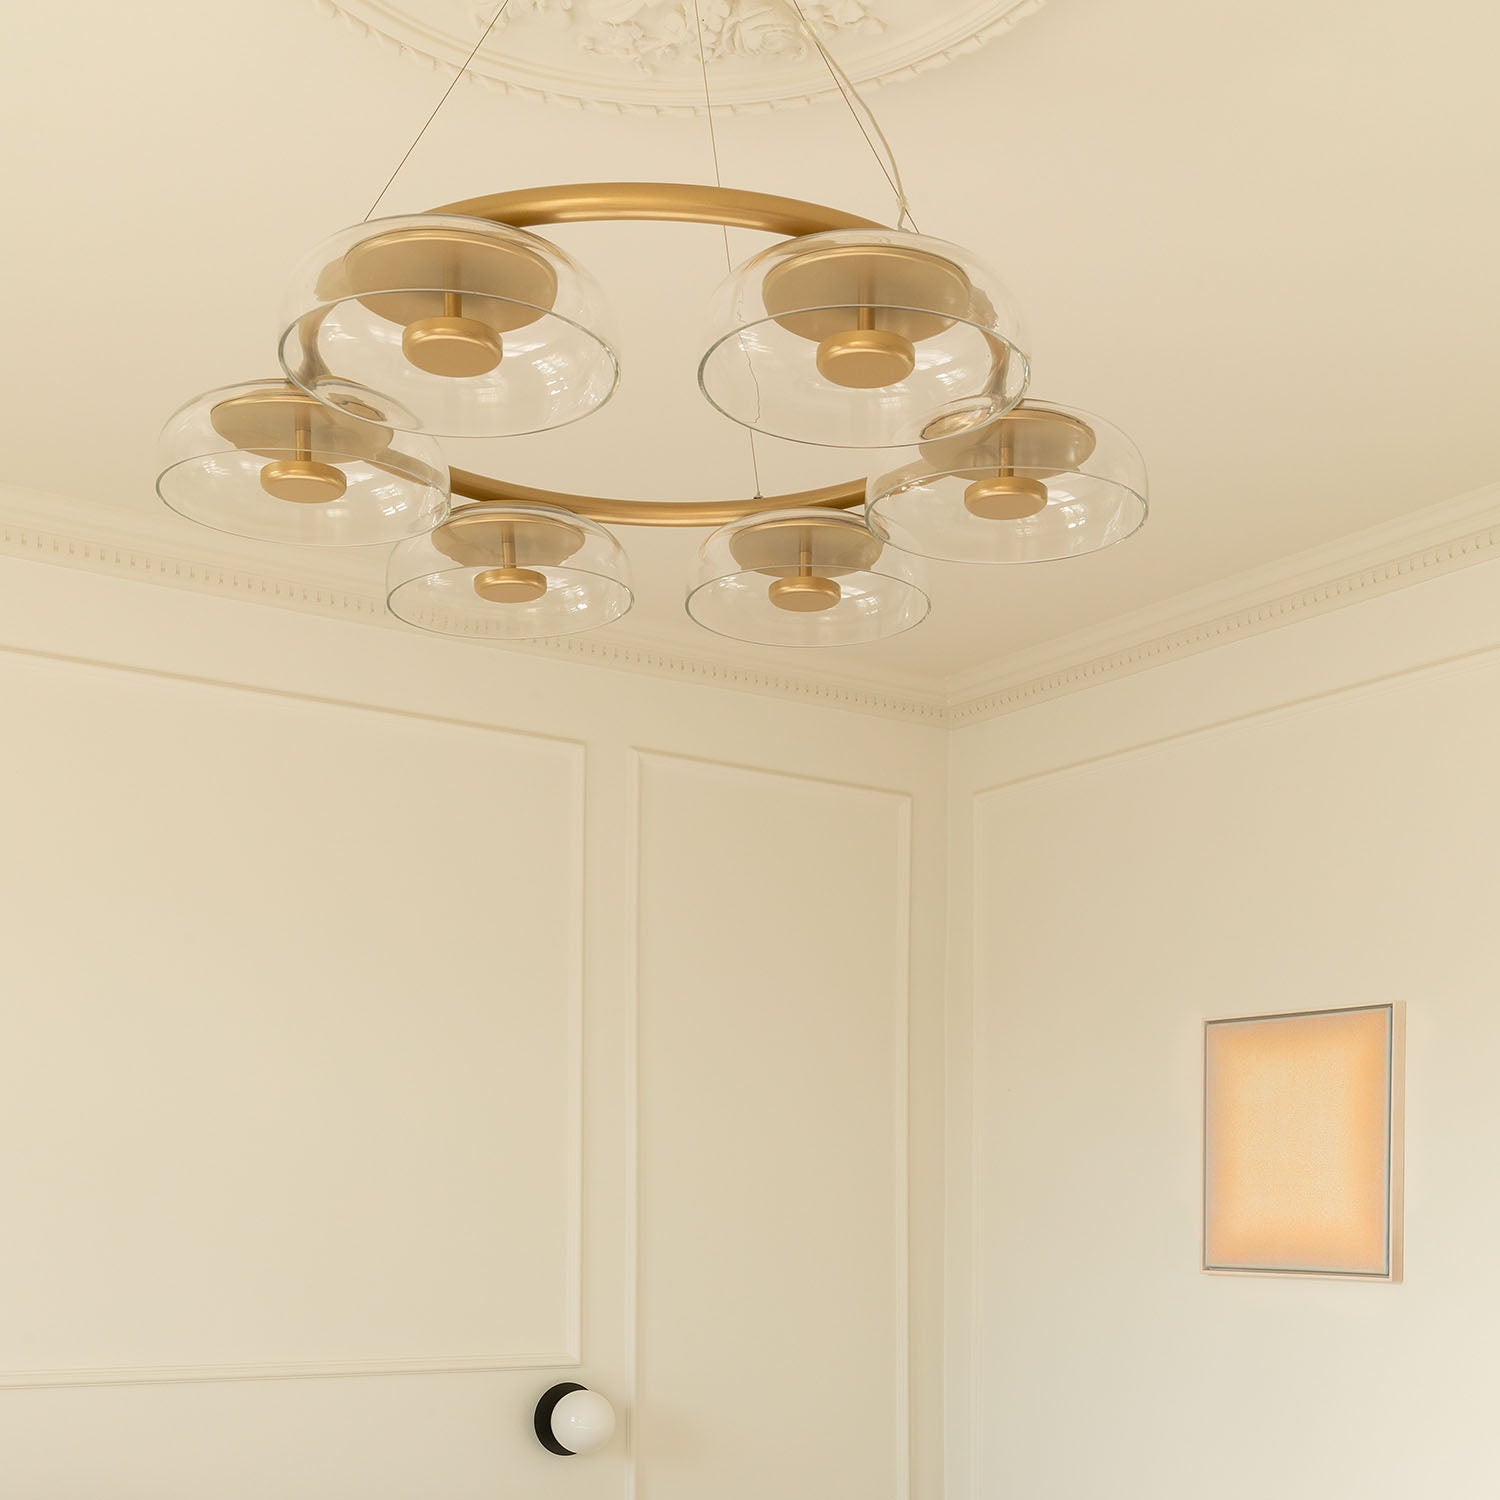 BLOSSI 6 - Luxurious and elegant golden chandelier made of glass and integrated LED